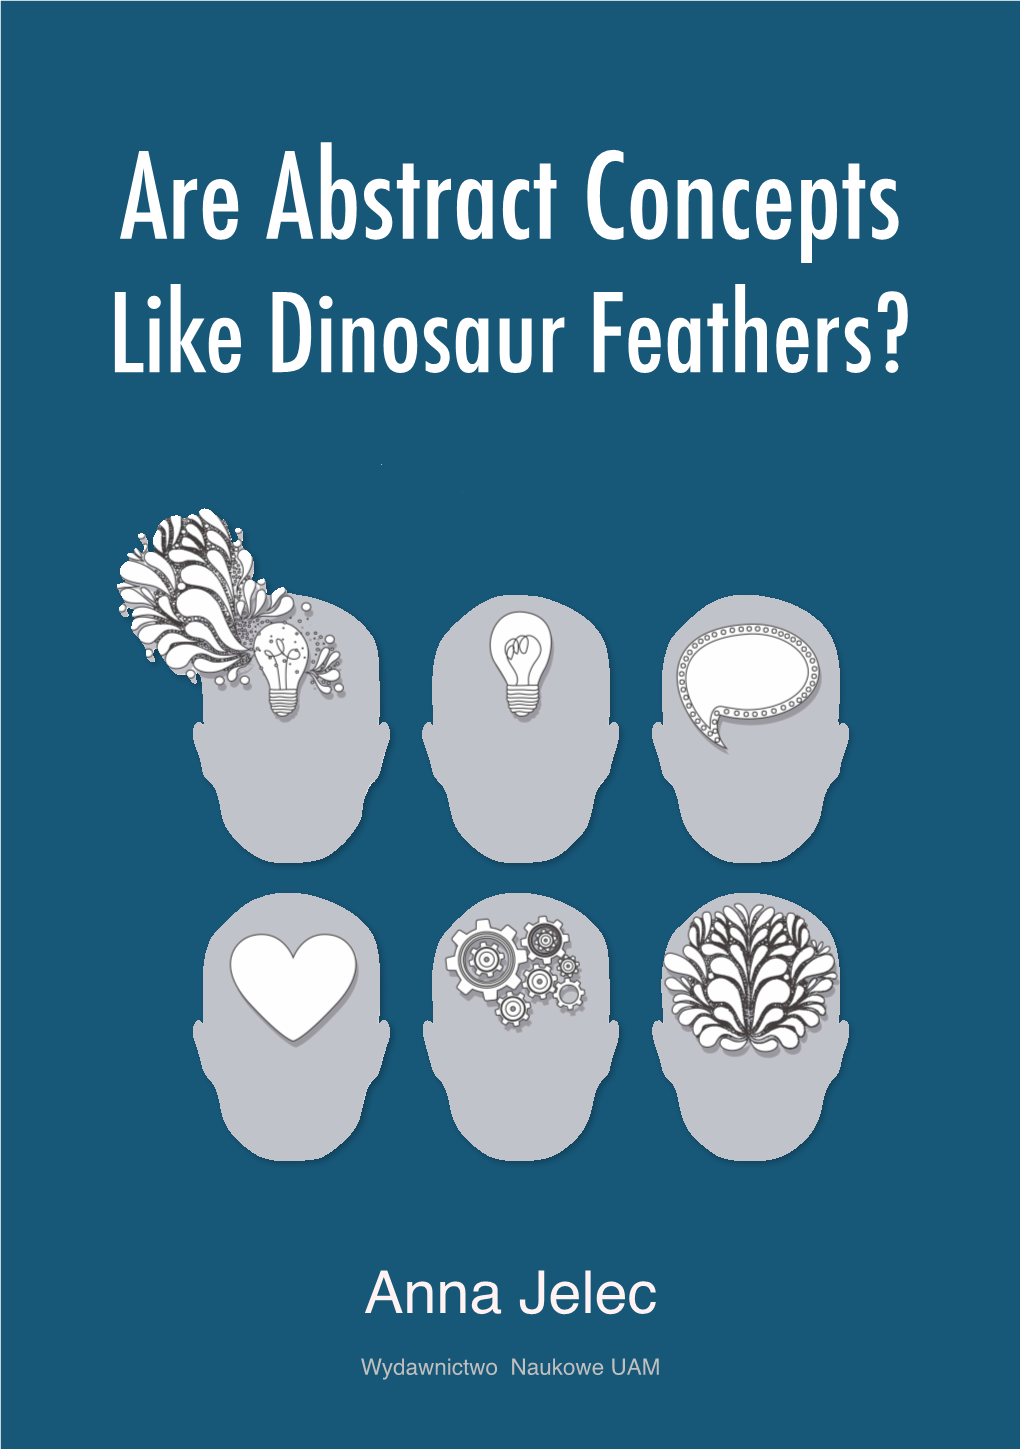 Are Abstract Concepts Like Dinosaur Feathers?